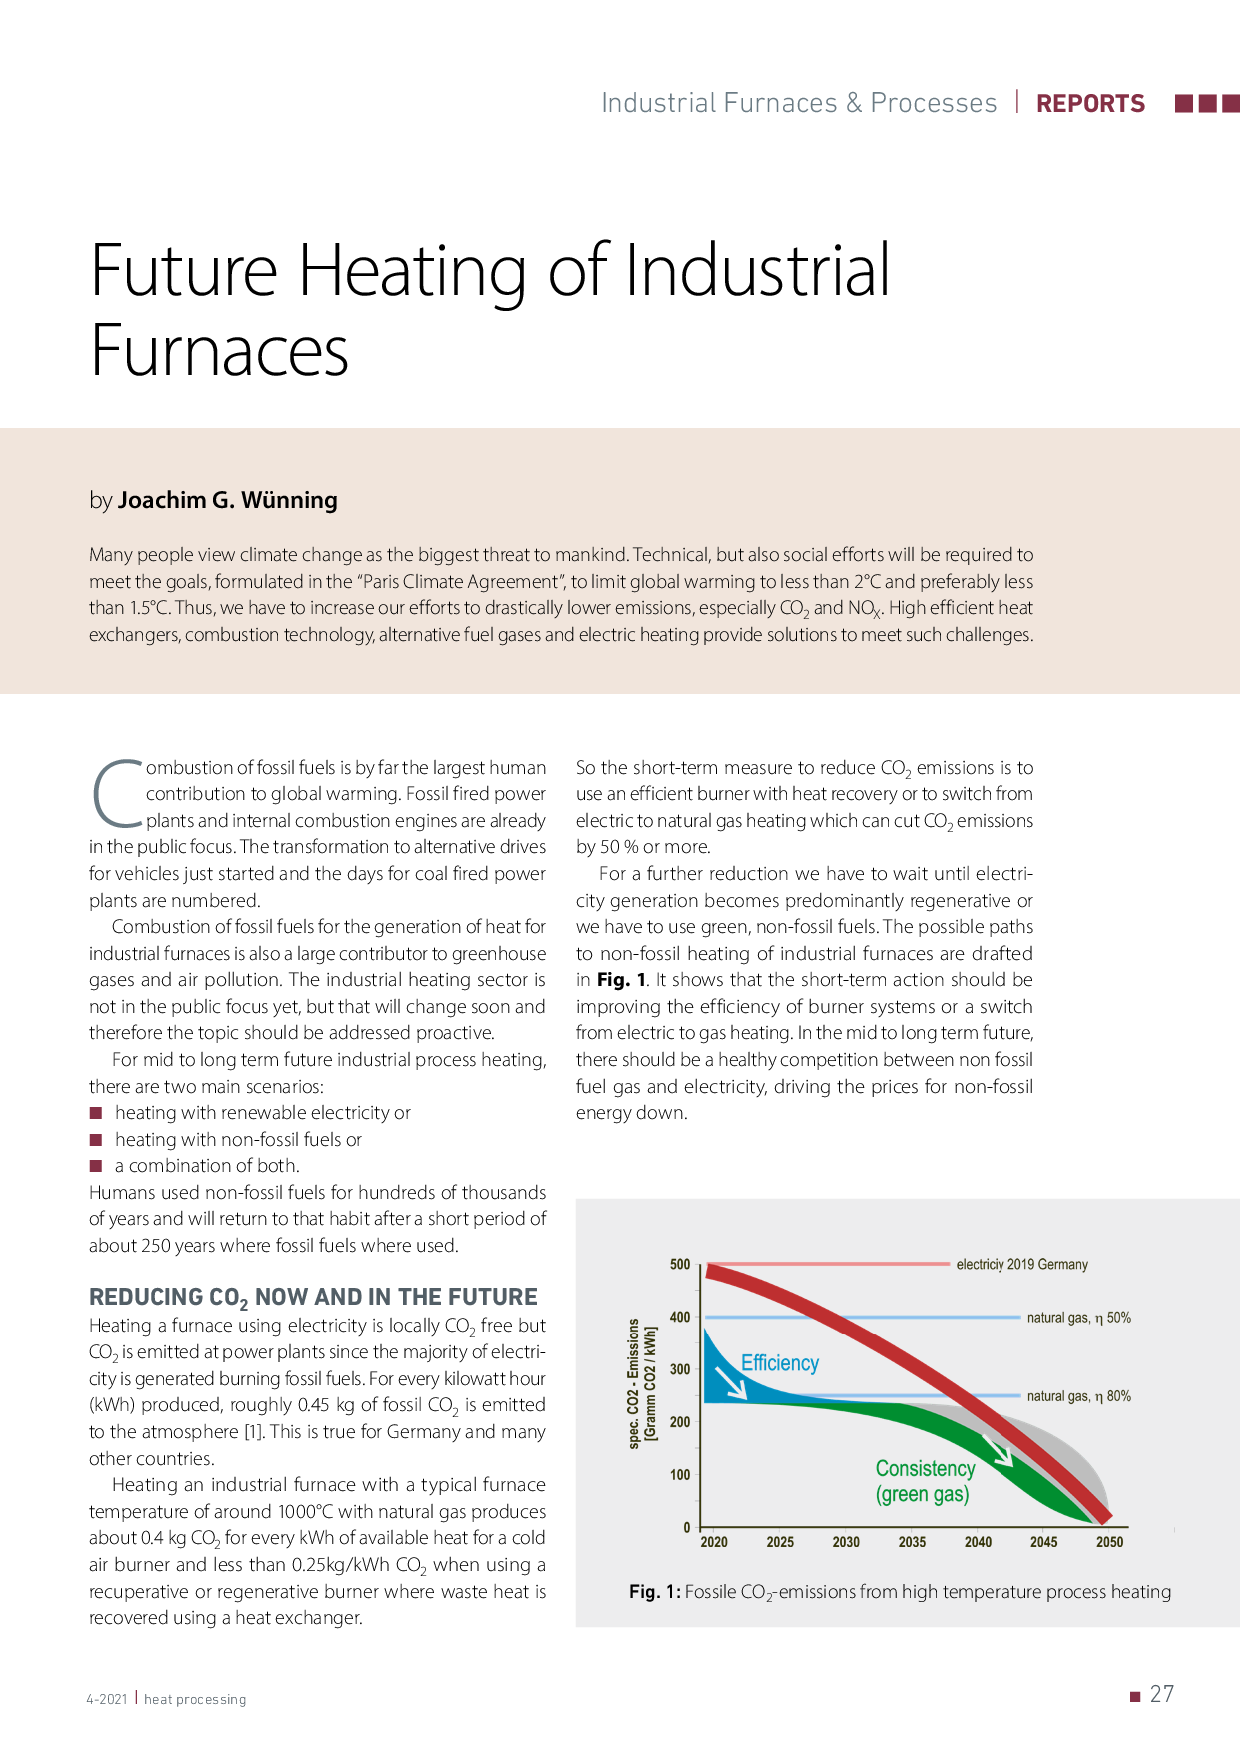 Future heating of industrial furnaces